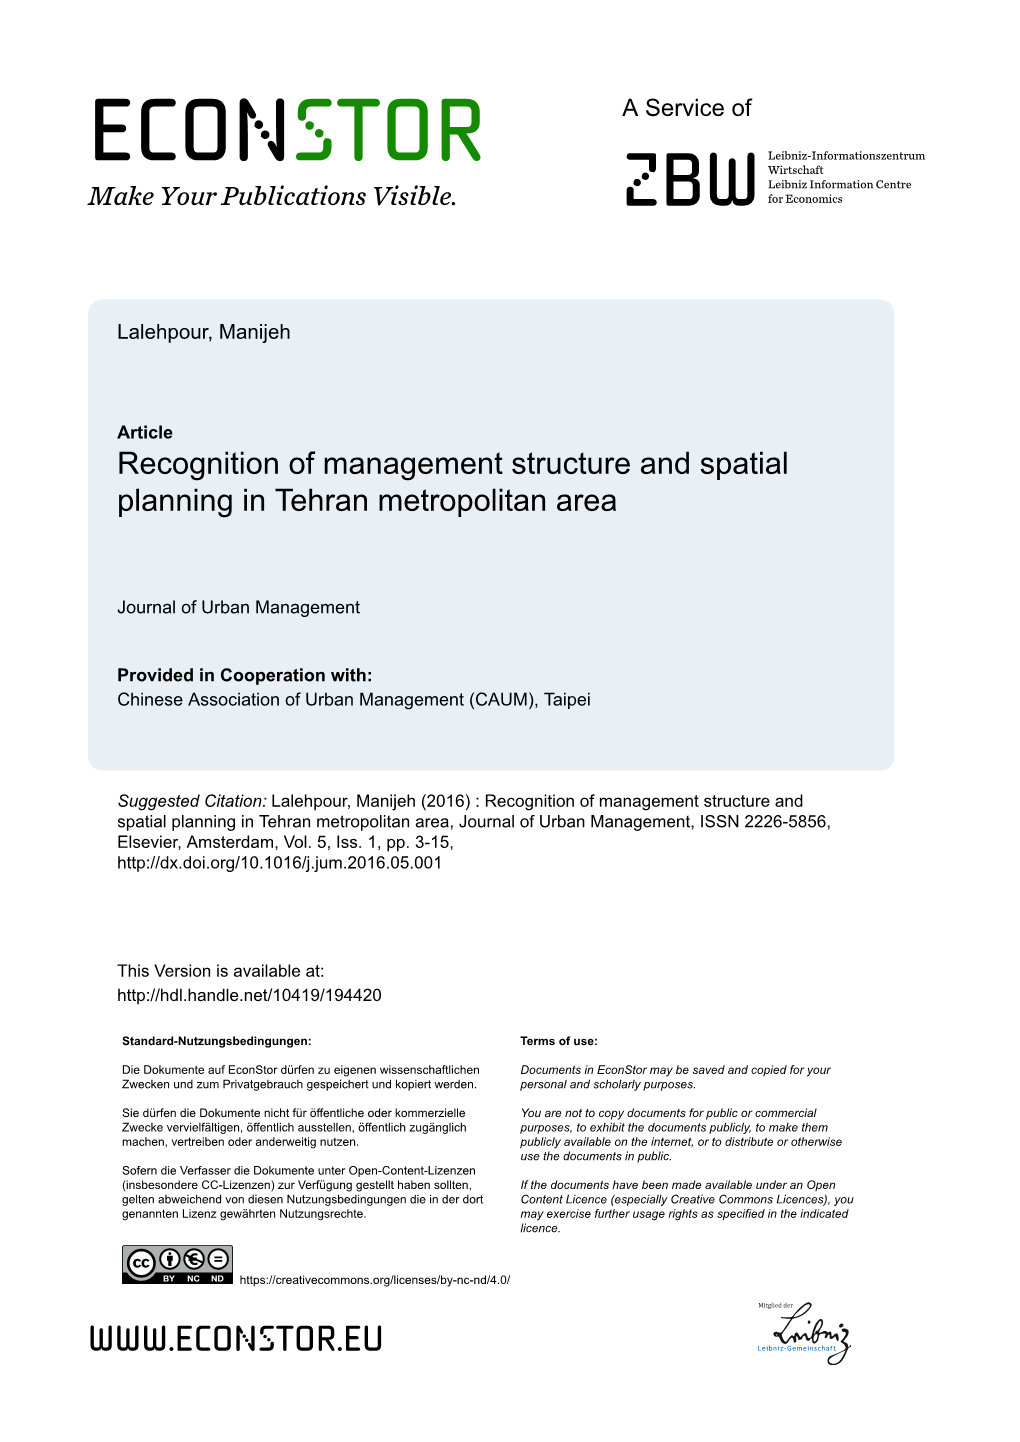 Recognition of Management Structure and Spatial Planning in Tehran Metropolitan Area